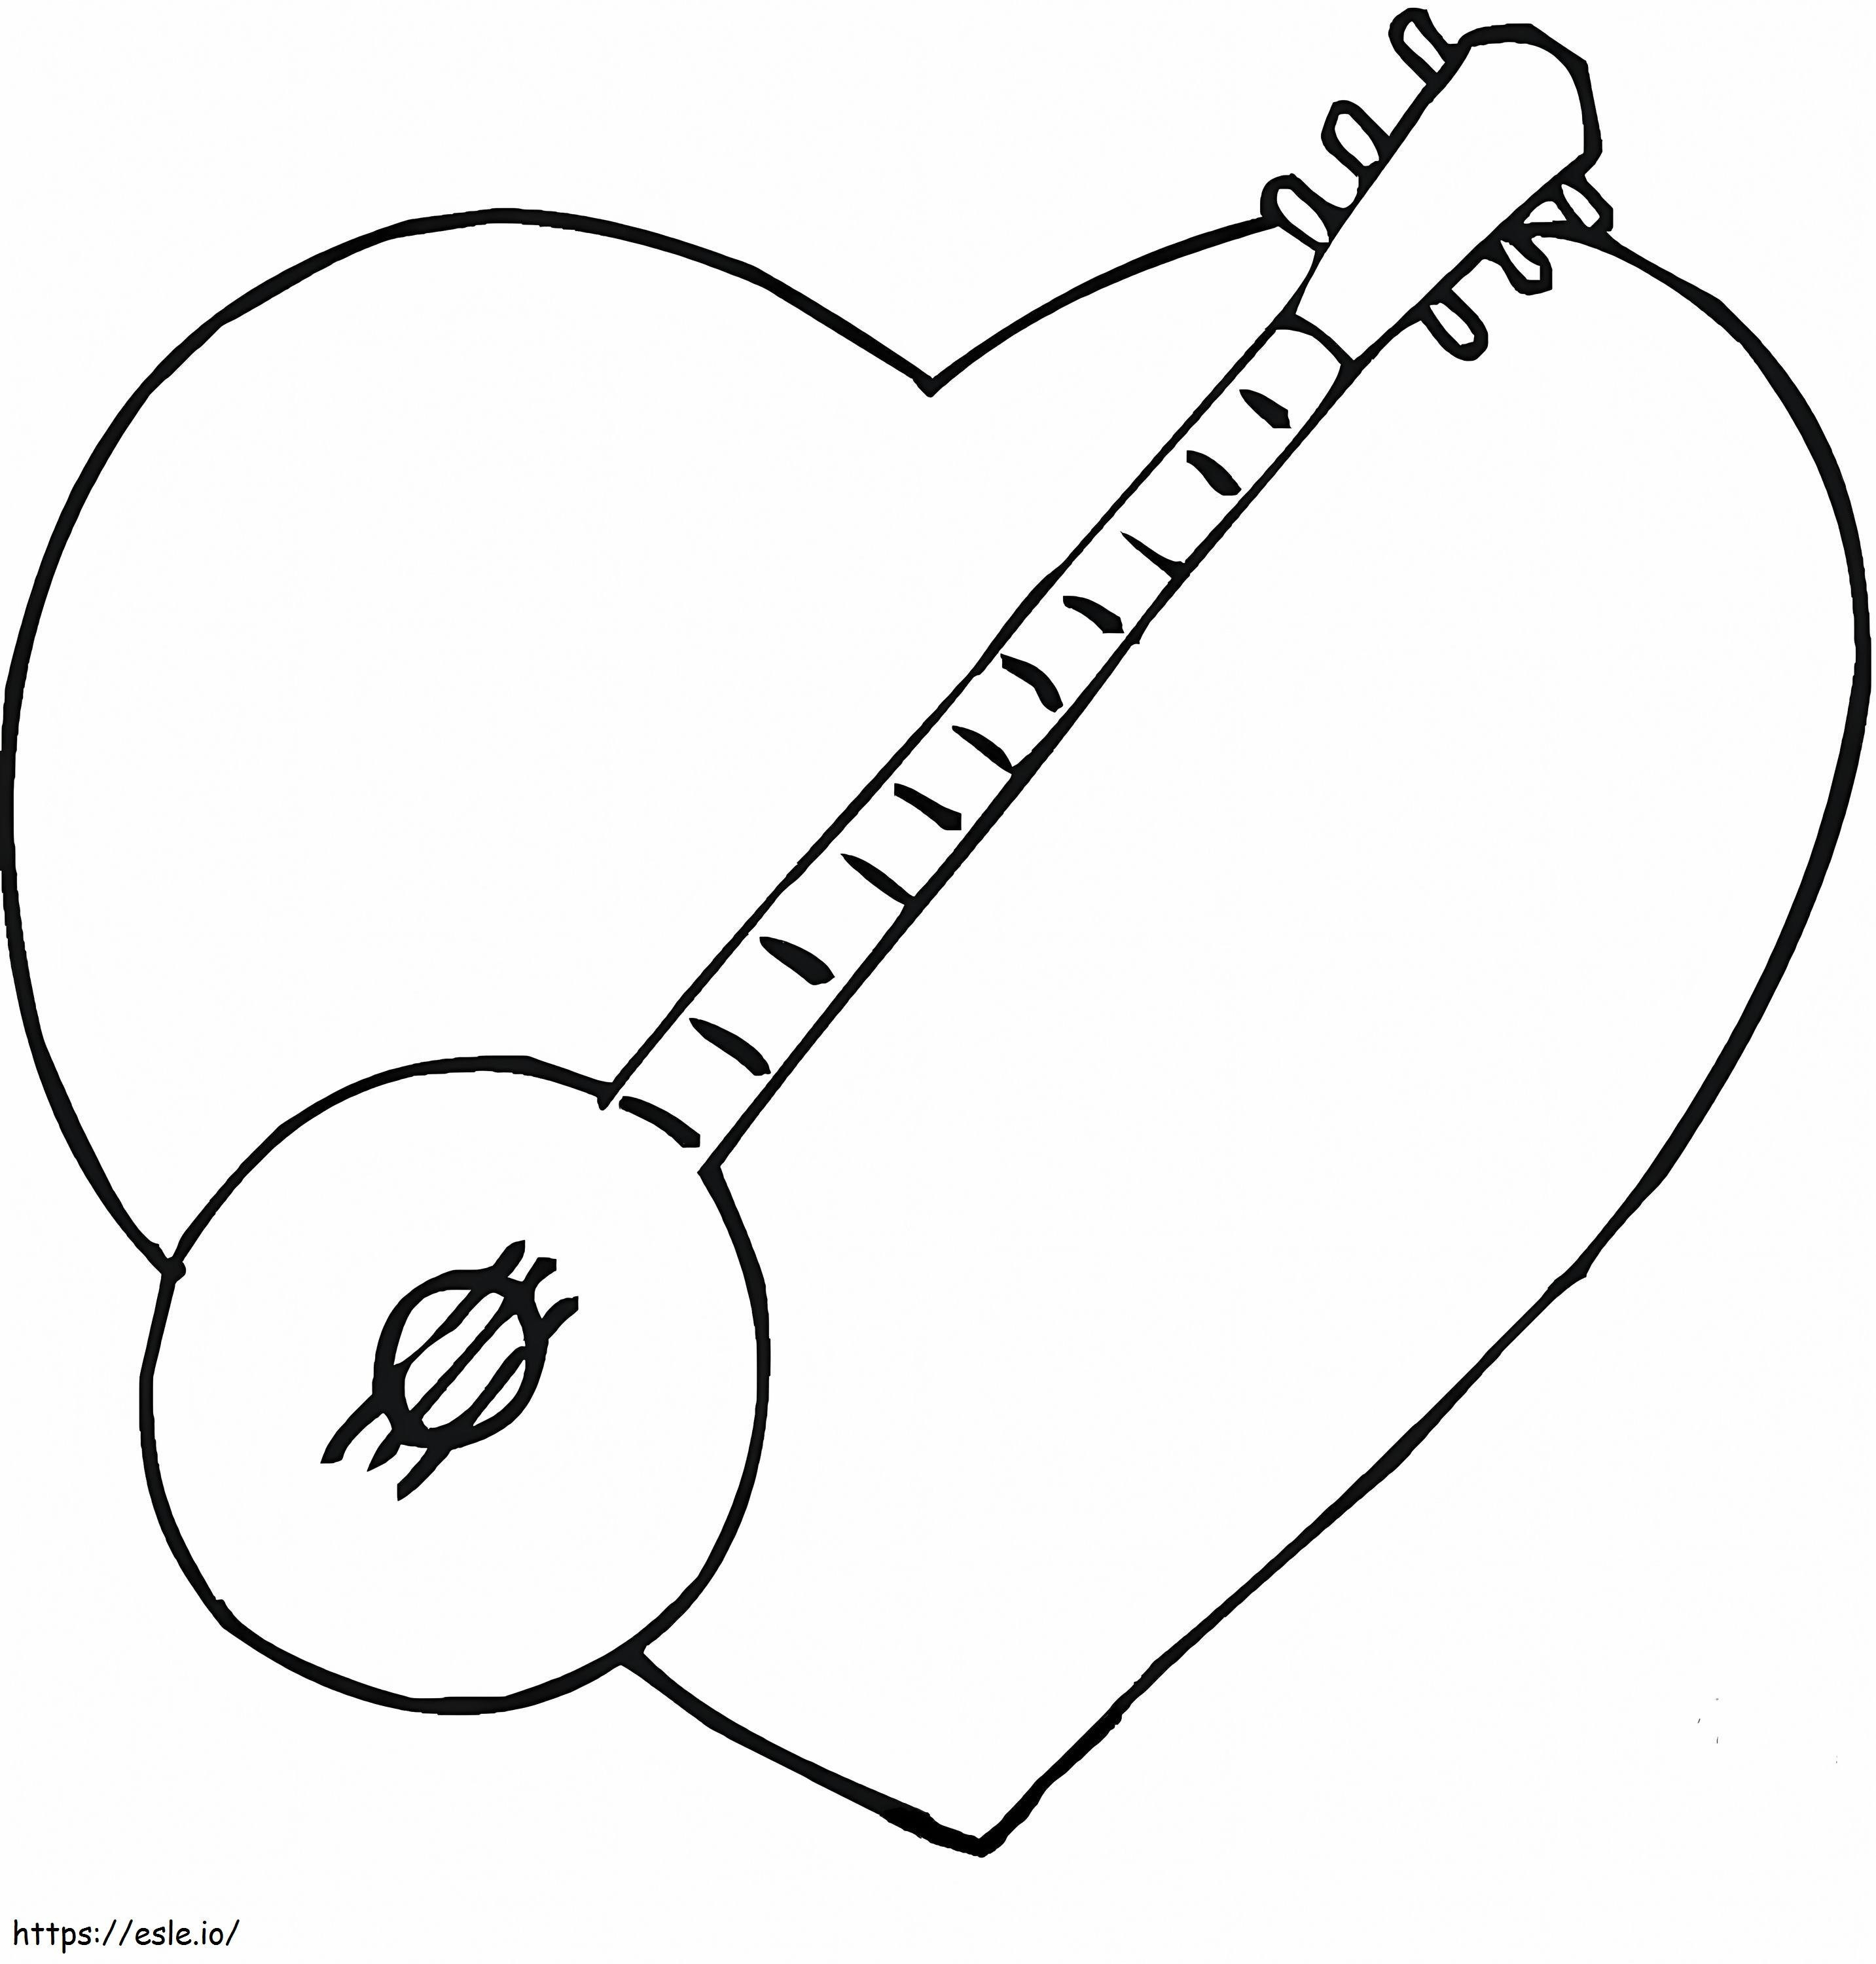 1541728543 Love Music coloring page